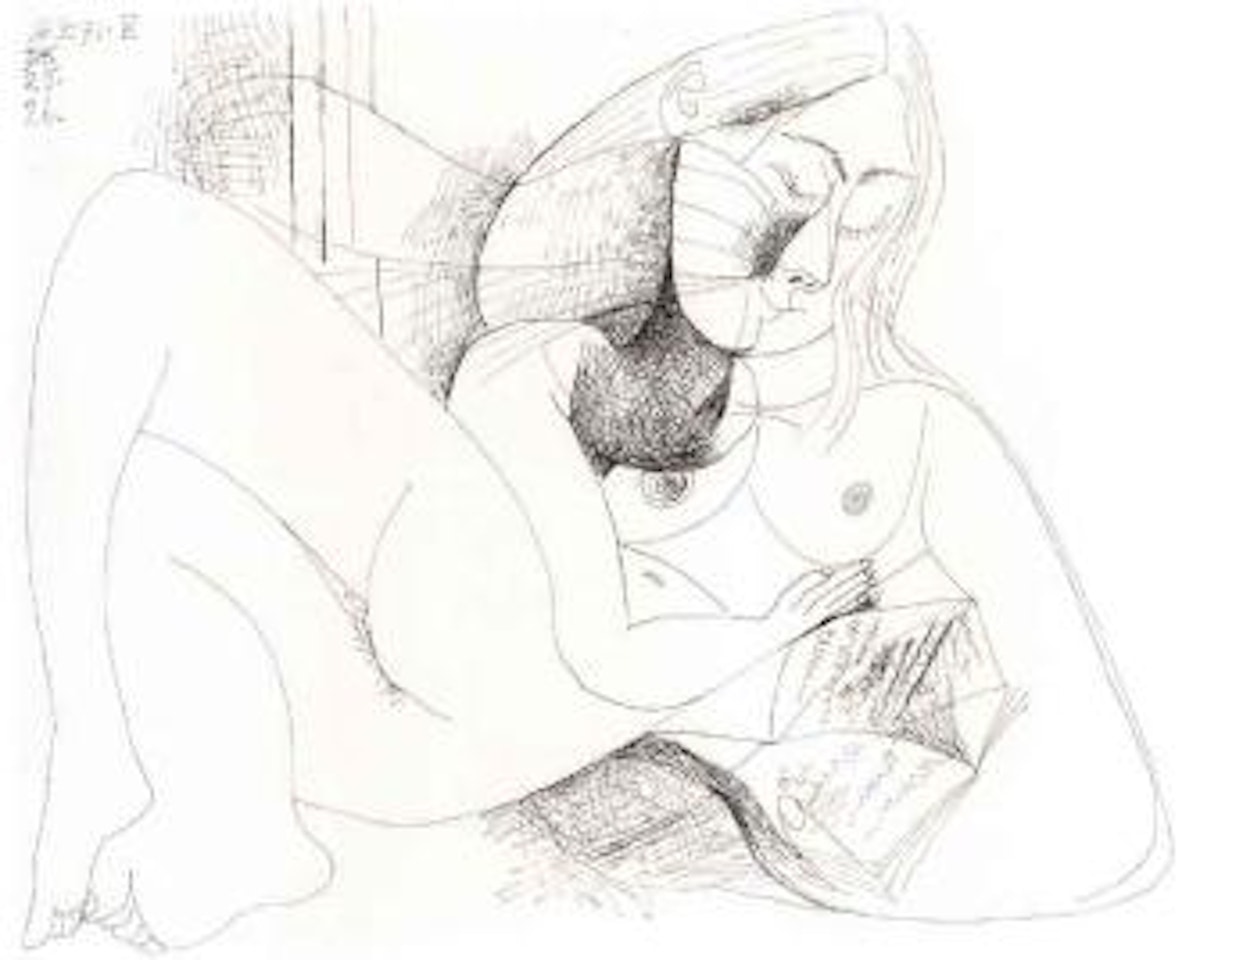 Femme nue lisant by Pablo Picasso